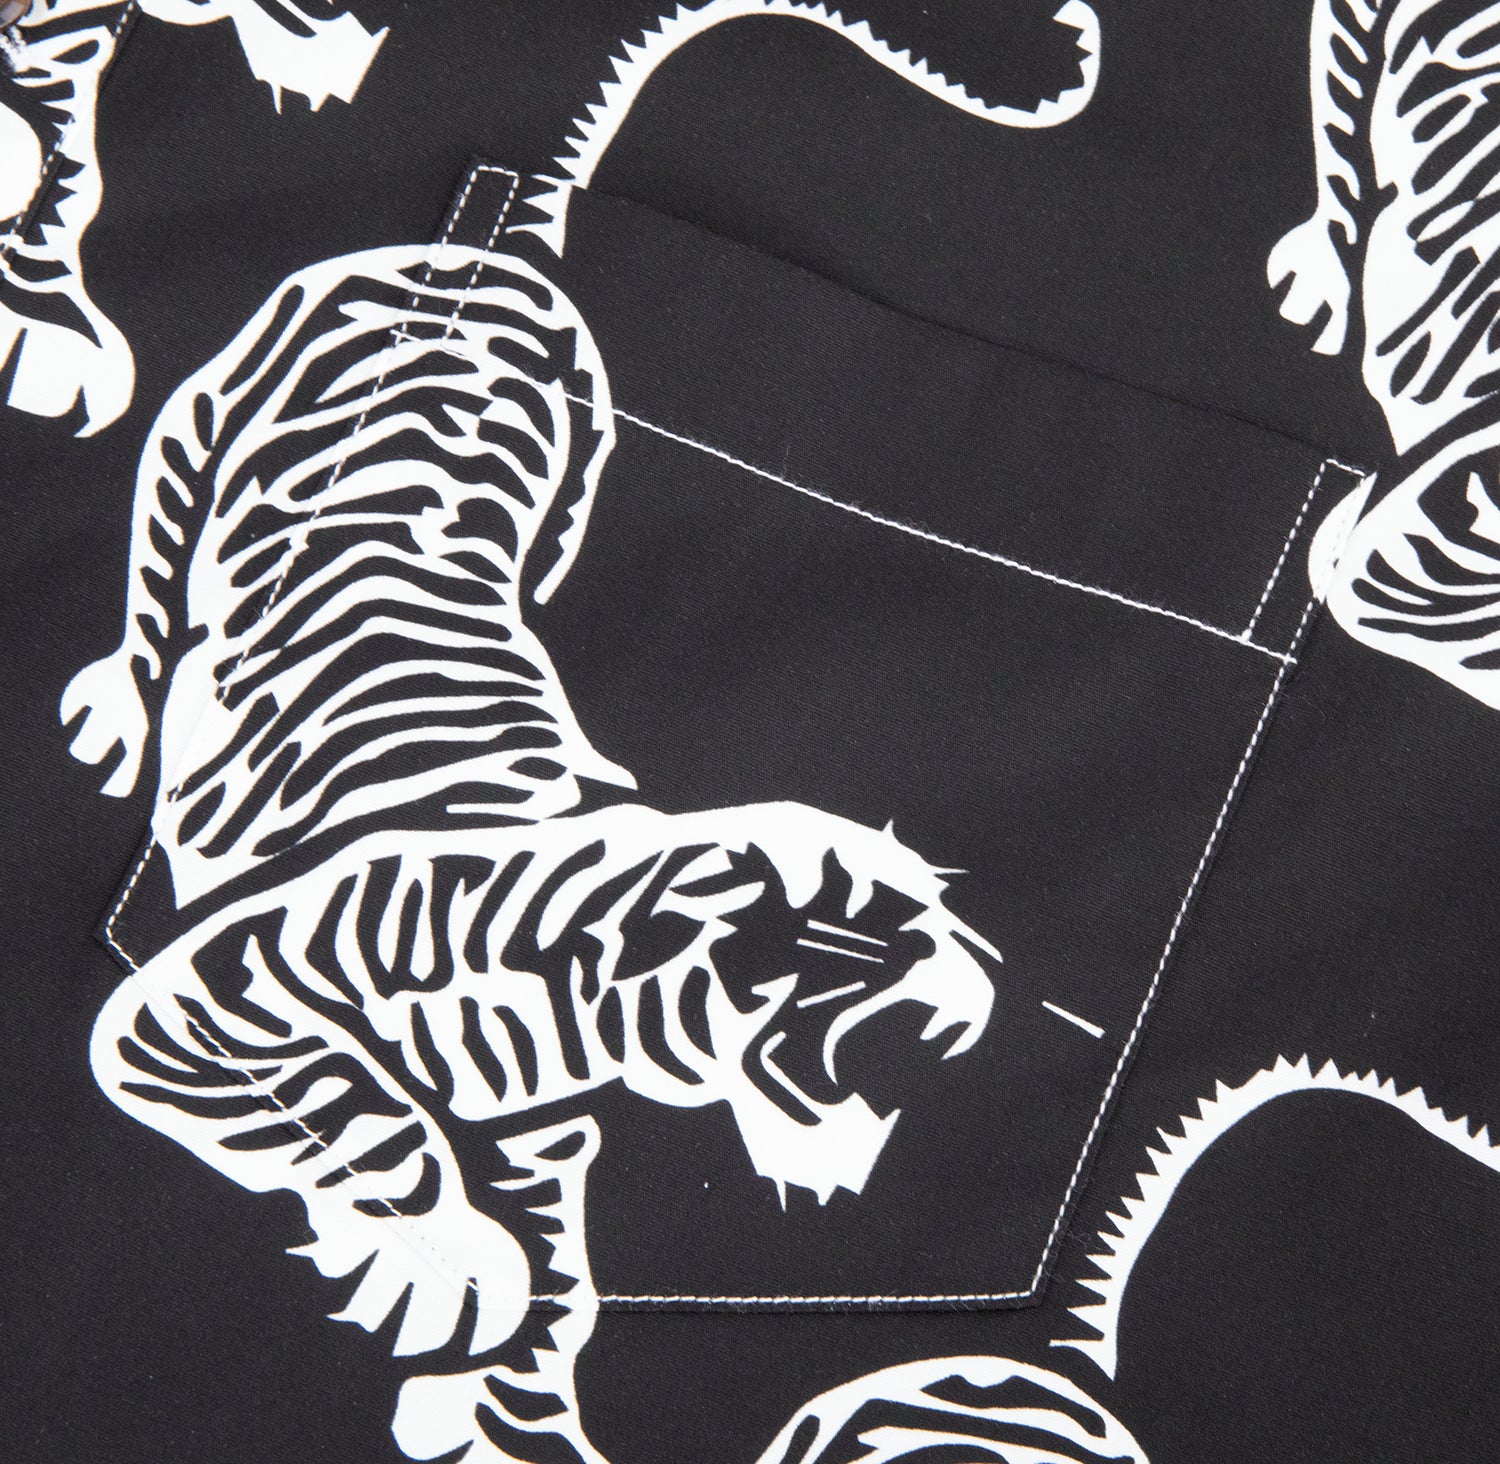 Jerry Garcia Black and White Tiger Short Sleeve Shirt - Section 119